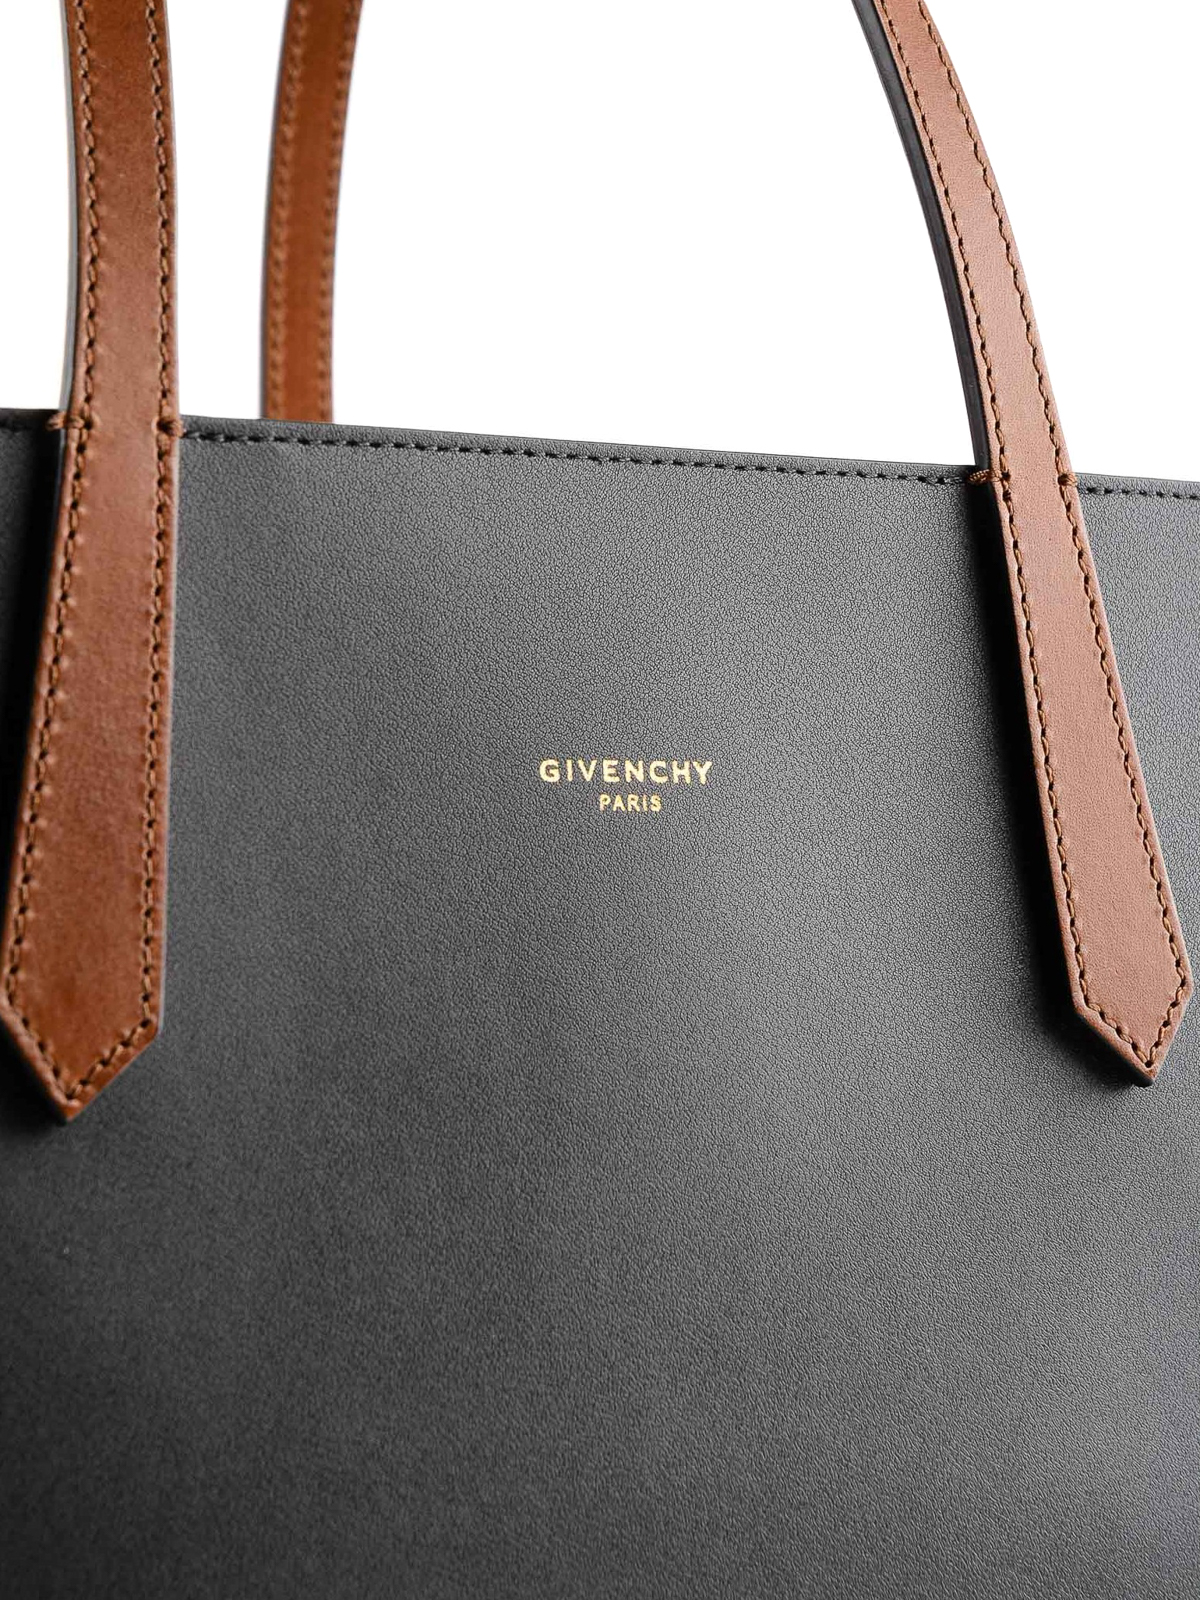 givenchy leather shopper